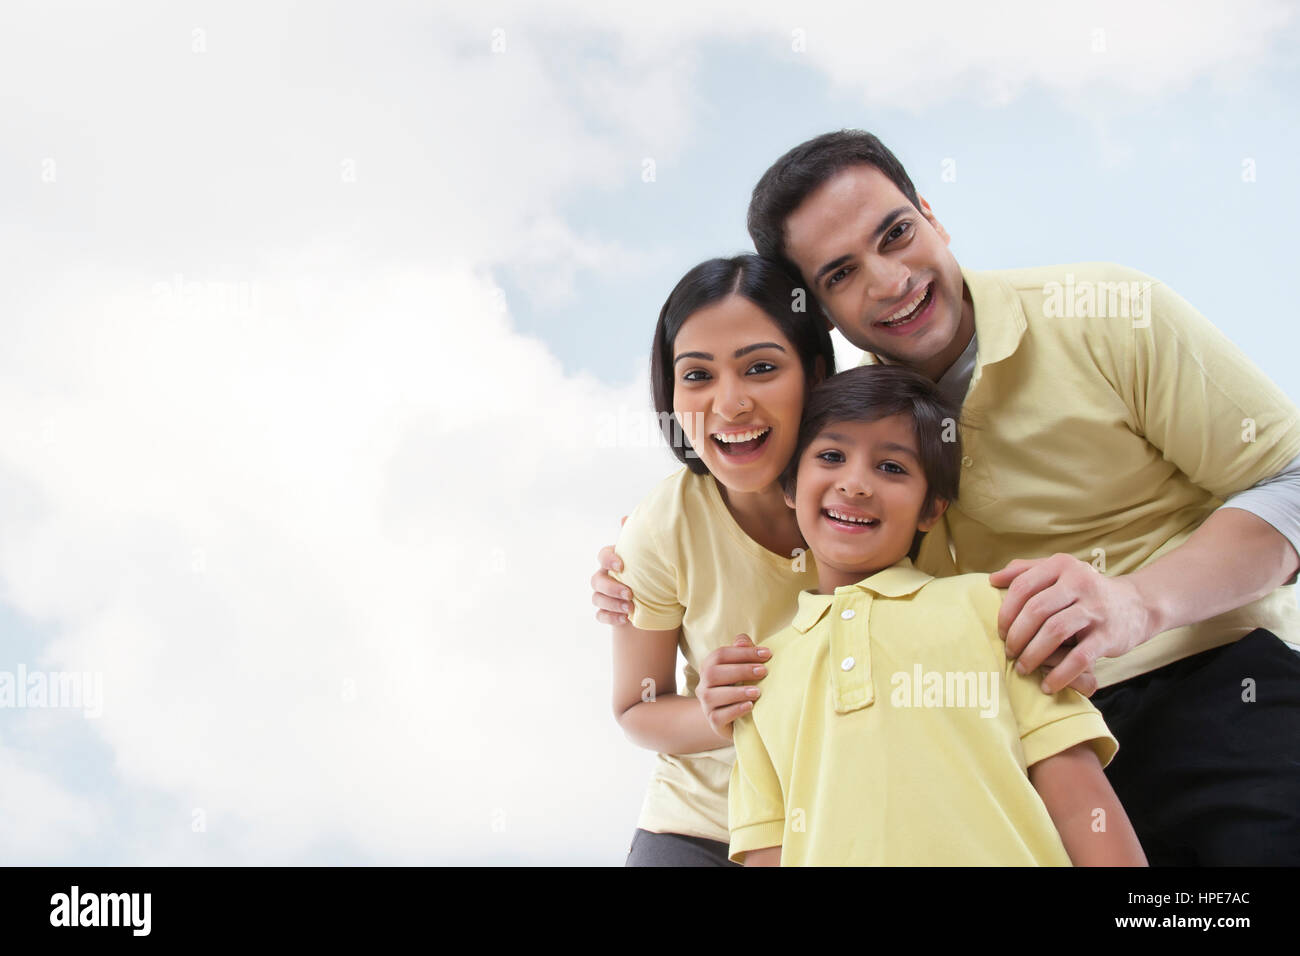 Portrait of a happy family looking at the camera against sky and clouds Stock Photo